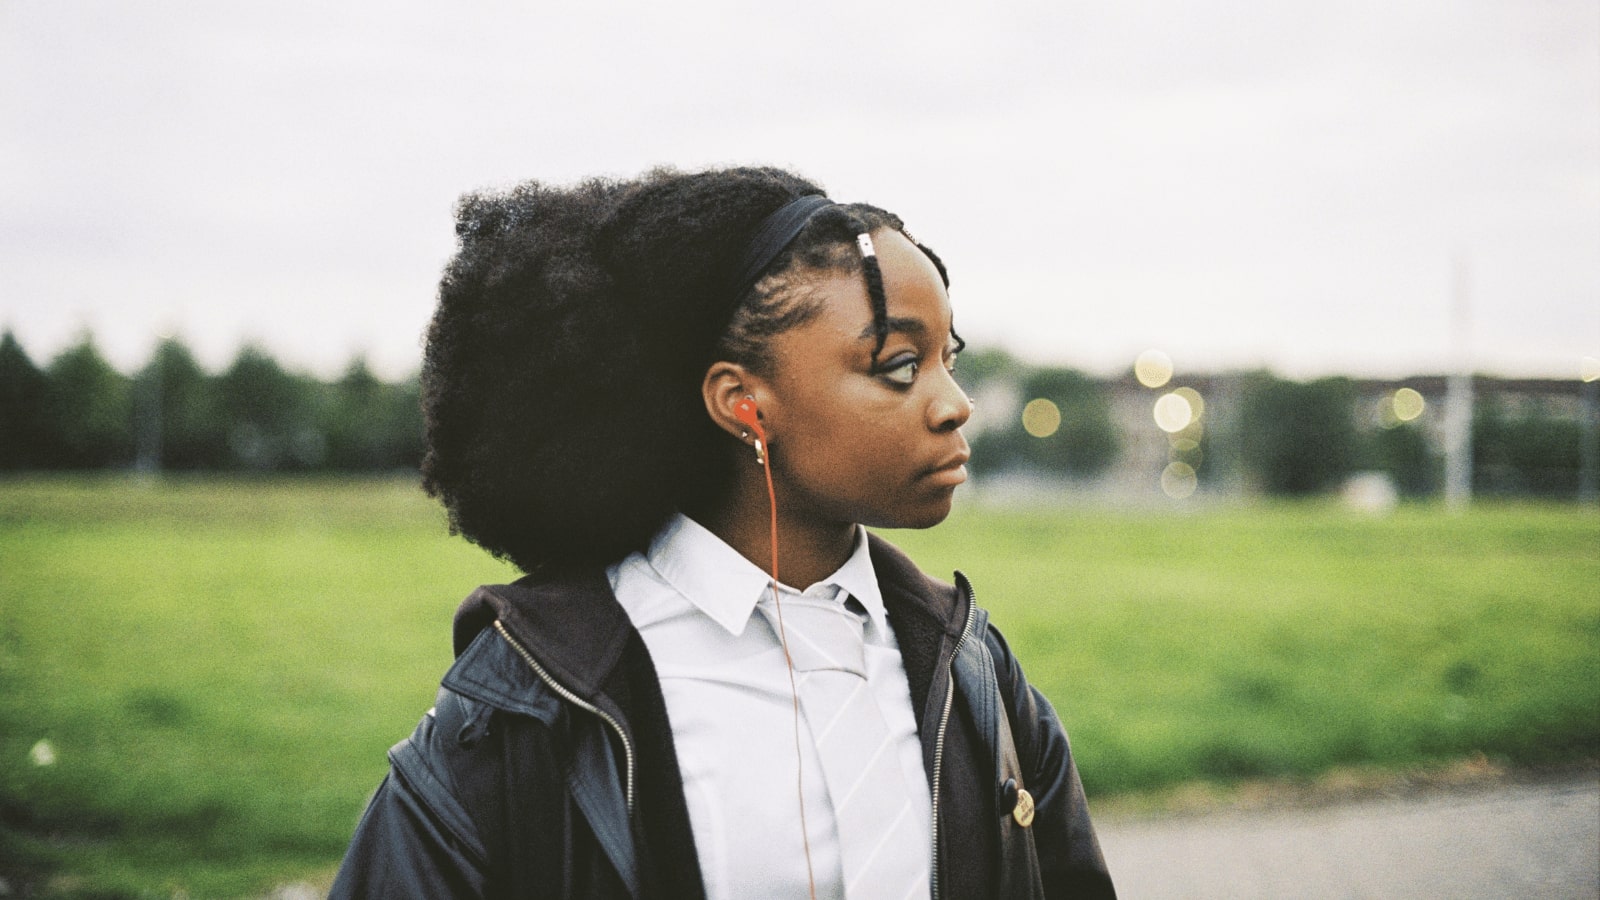 Still from short film Blackwool, courtesy of Short Circuit. Actress Miriam Nyarko stands outdoors in a park looking to the right, she wears white school uniform shirt and tie, and a black leather jacket.